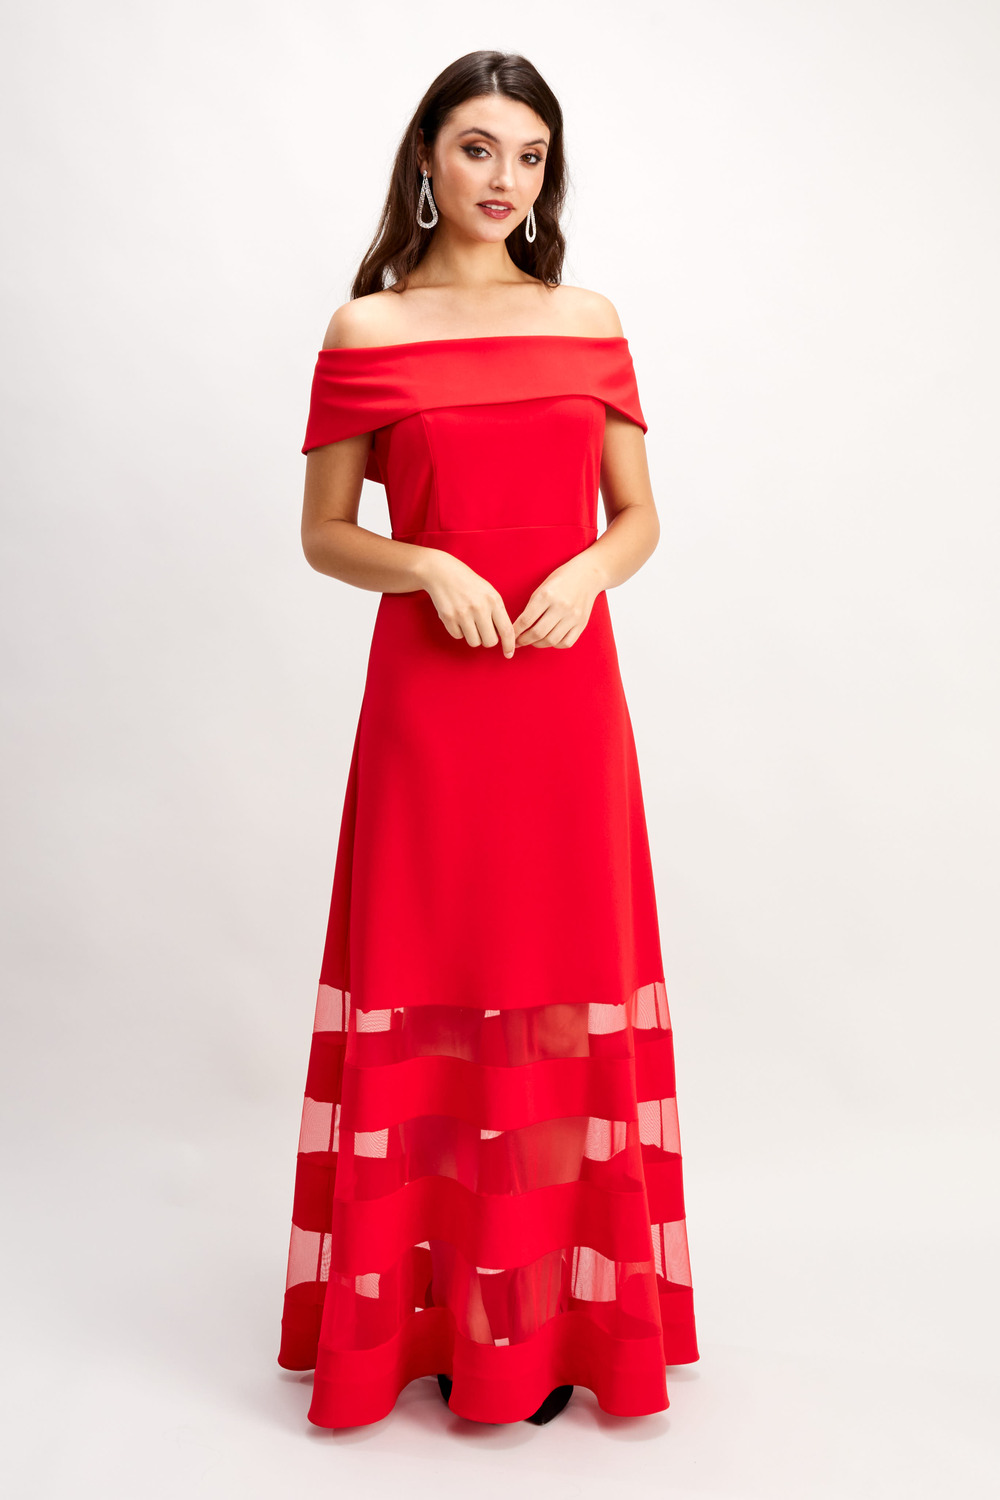 Mesh Panel Off-Shoulder Gown Style 248126. Valentine Red